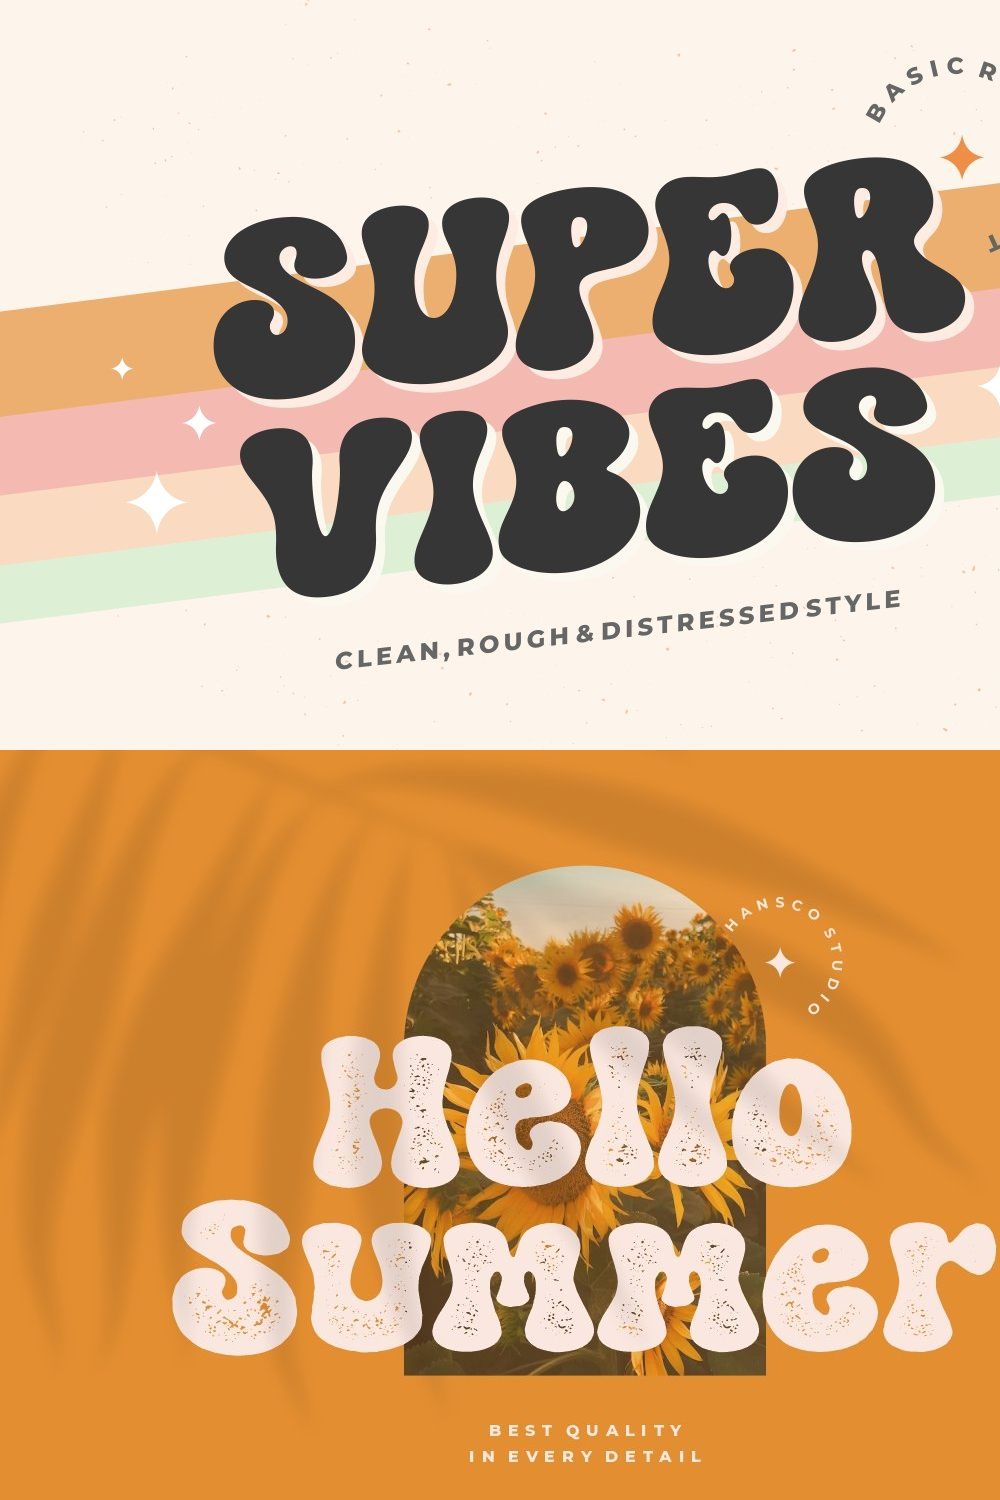 Super Vibes - Retro Groovy Style pinterest preview image.